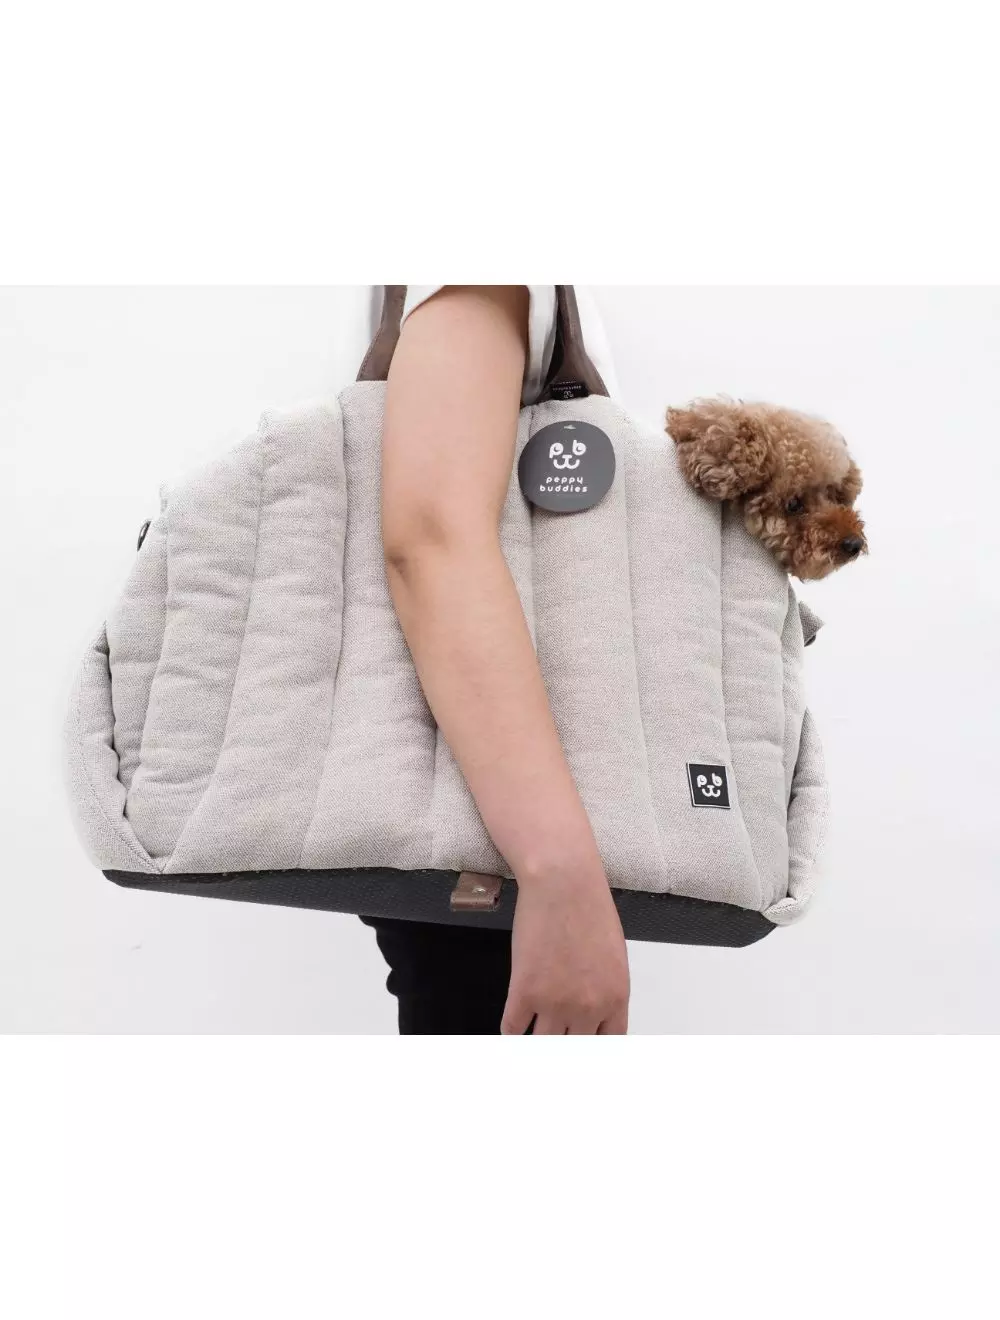 Nordic Paws Carrier Bag For Cars